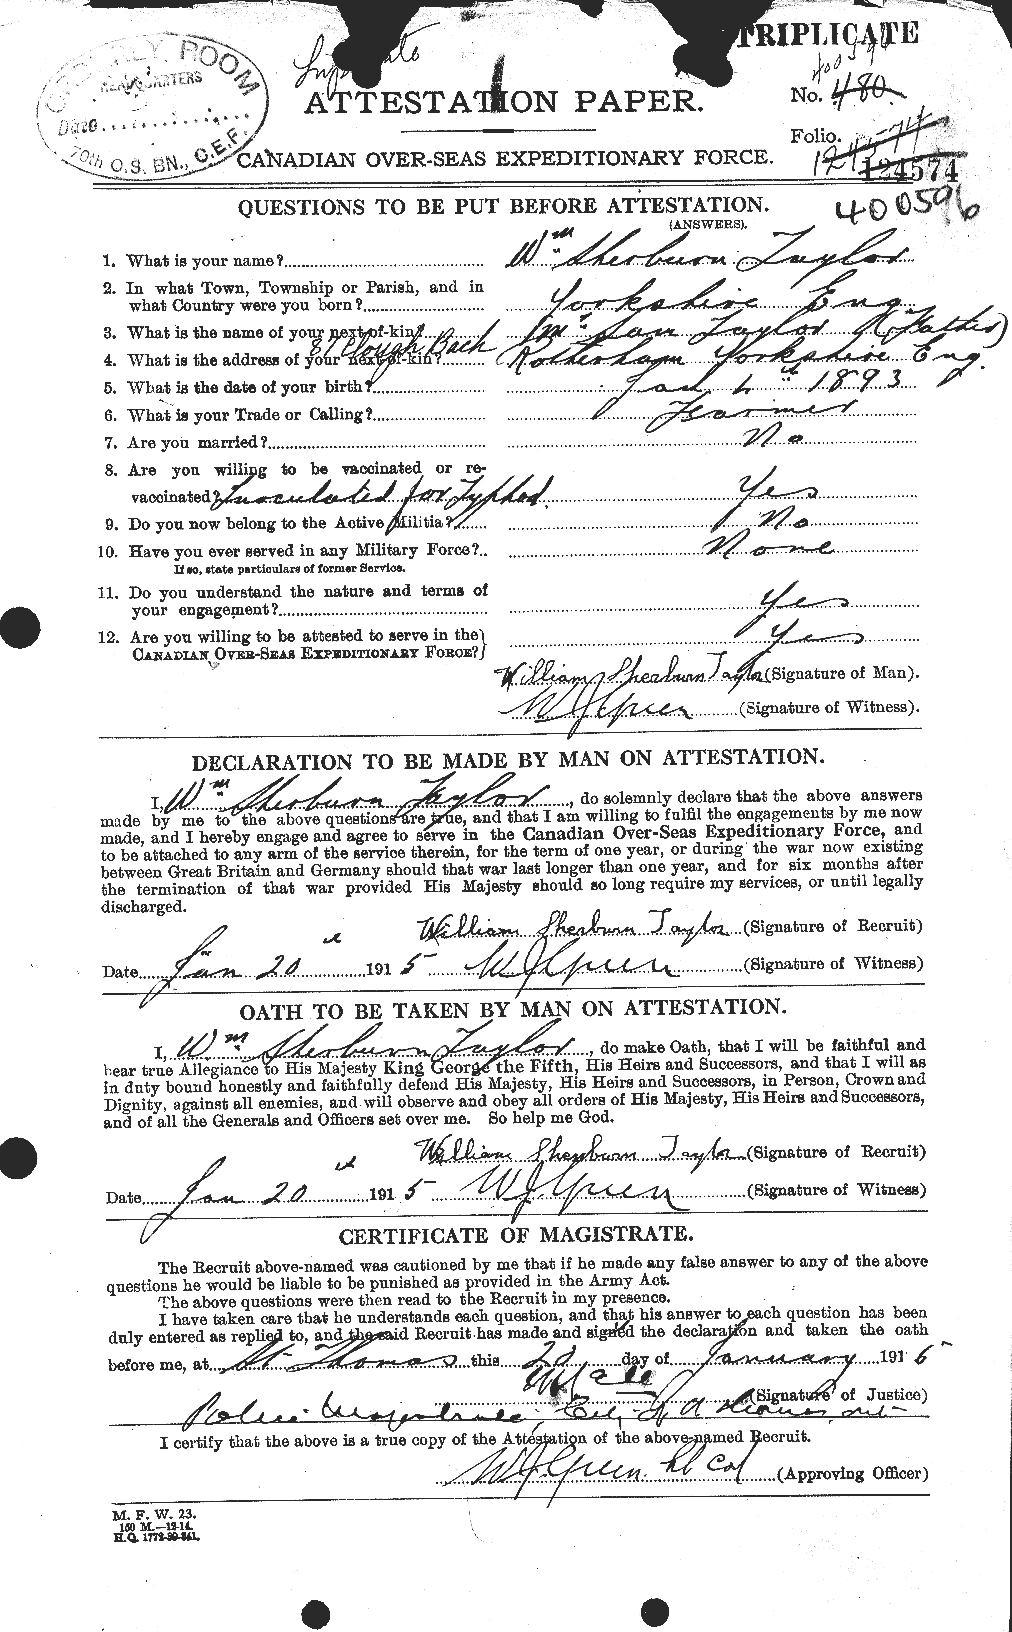 Personnel Records of the First World War - CEF 628347a